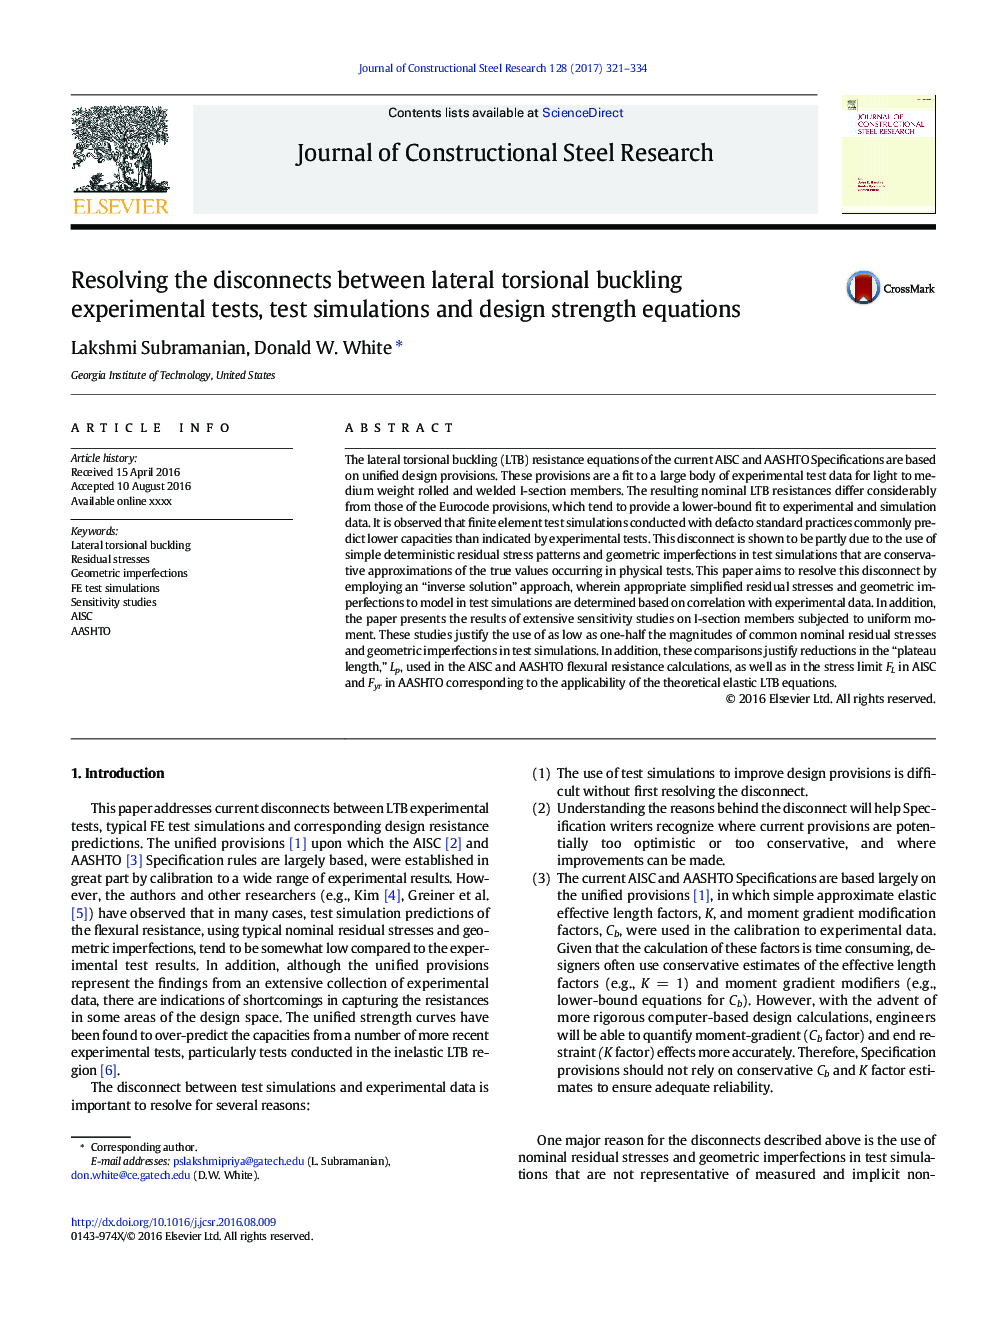 Resolving the disconnects between lateral torsional buckling experimental tests, test simulations and design strength equations